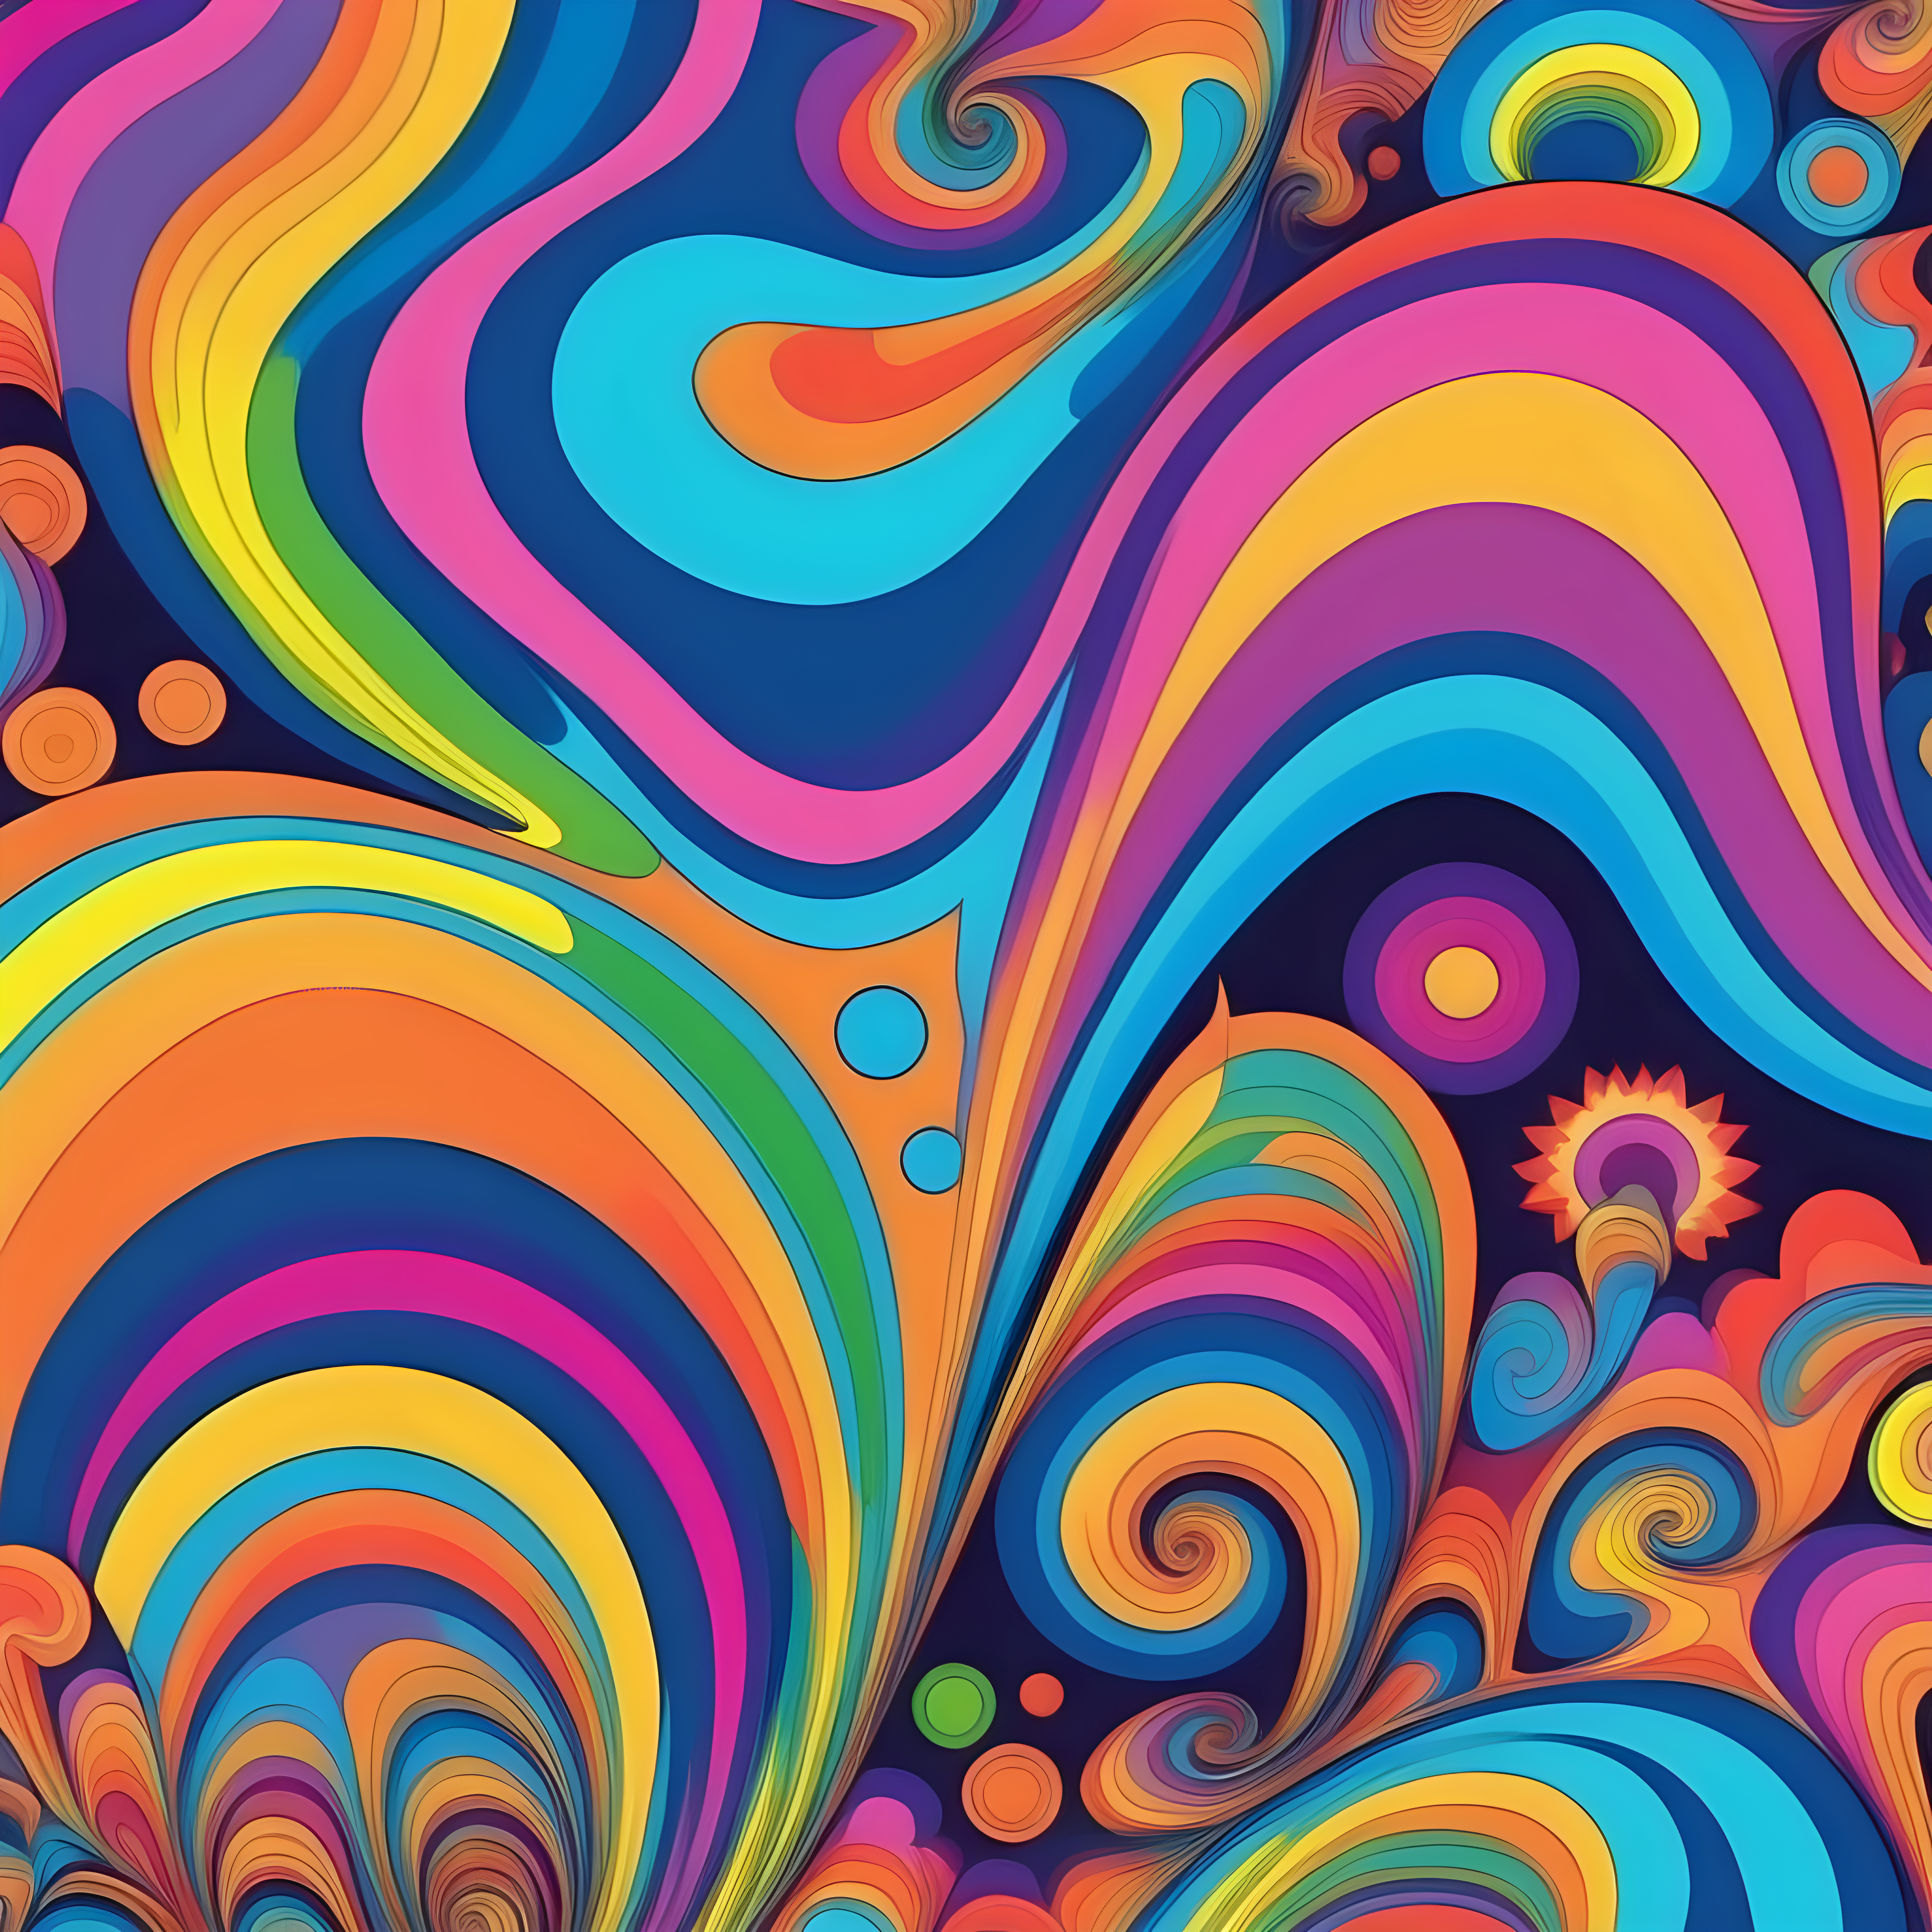 Colourful psychedelic pattern